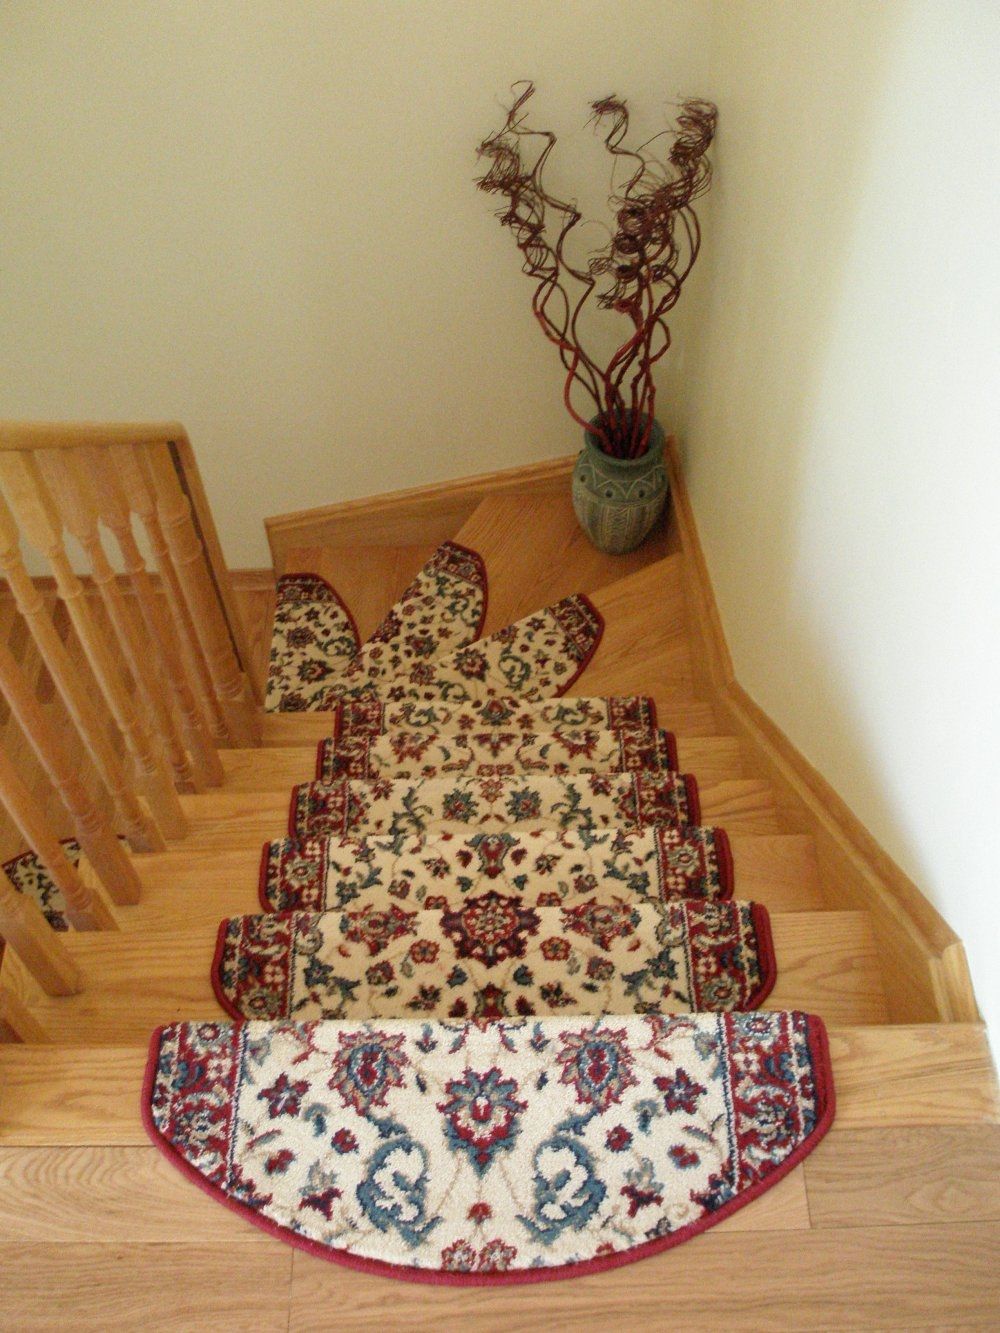 Flooring Pretty Stair Treads Carpet For Stair Decoration Idea Pertaining To Indoor Outdoor Carpet Stair Treads (View 11 of 20)